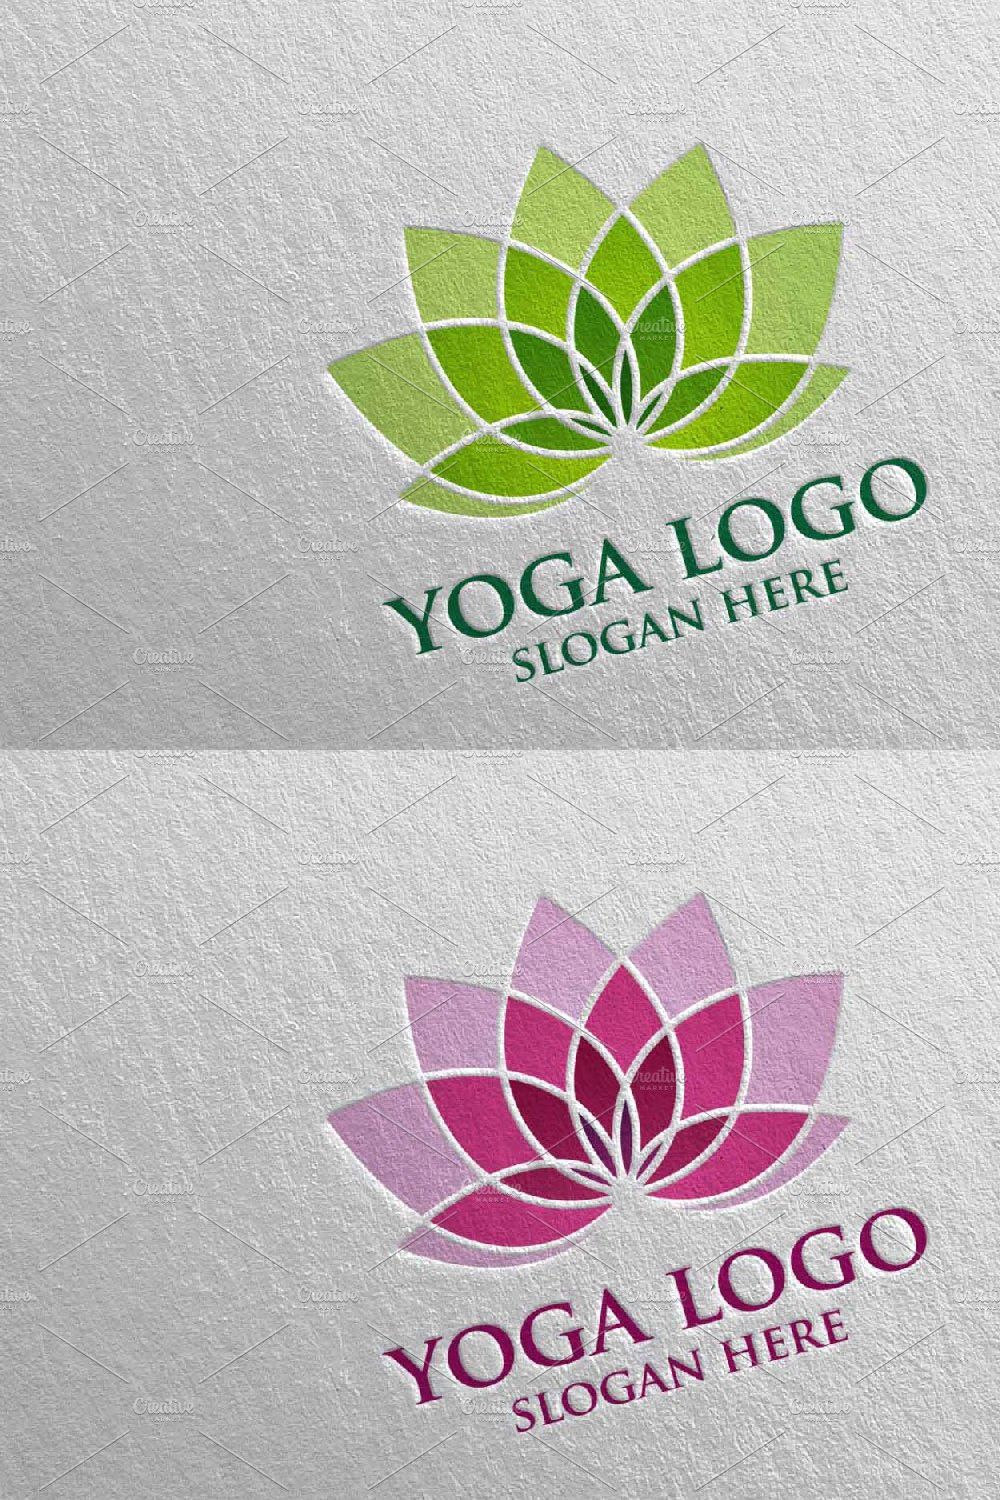 Yoga and Spa Lotus Flower logo 32 pinterest preview image.